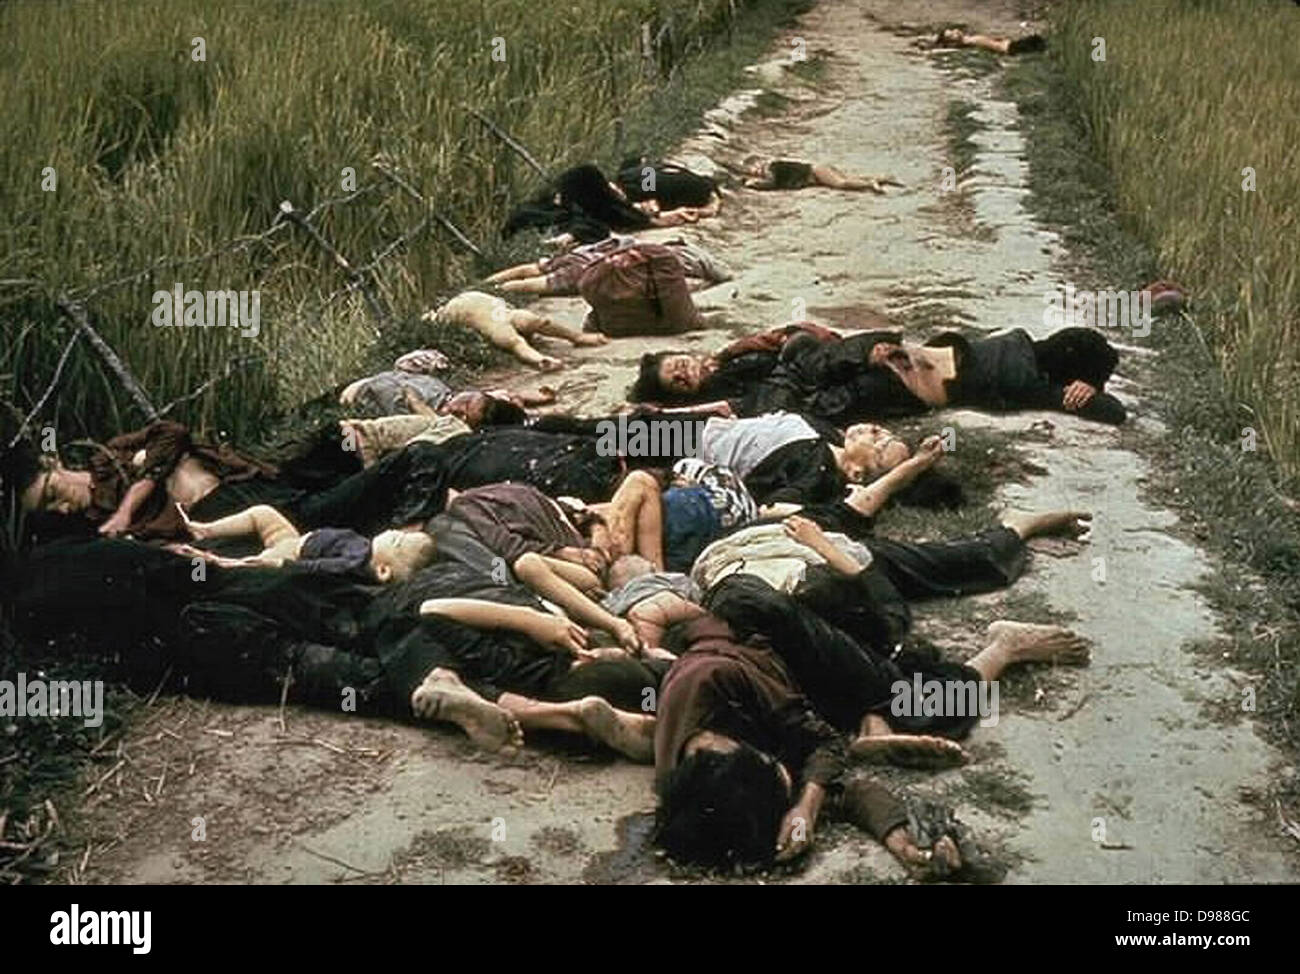 The My Lai Massacre, the mass murder of 347 to 504 unarmed citizens of the Republic of Vietnam (South Vietnam), almost entirely civilians and the majority of them women and children, perpetrated by US Army forces on March 16 1968. Bodies of some of the victims lying along a road. Stock Photo